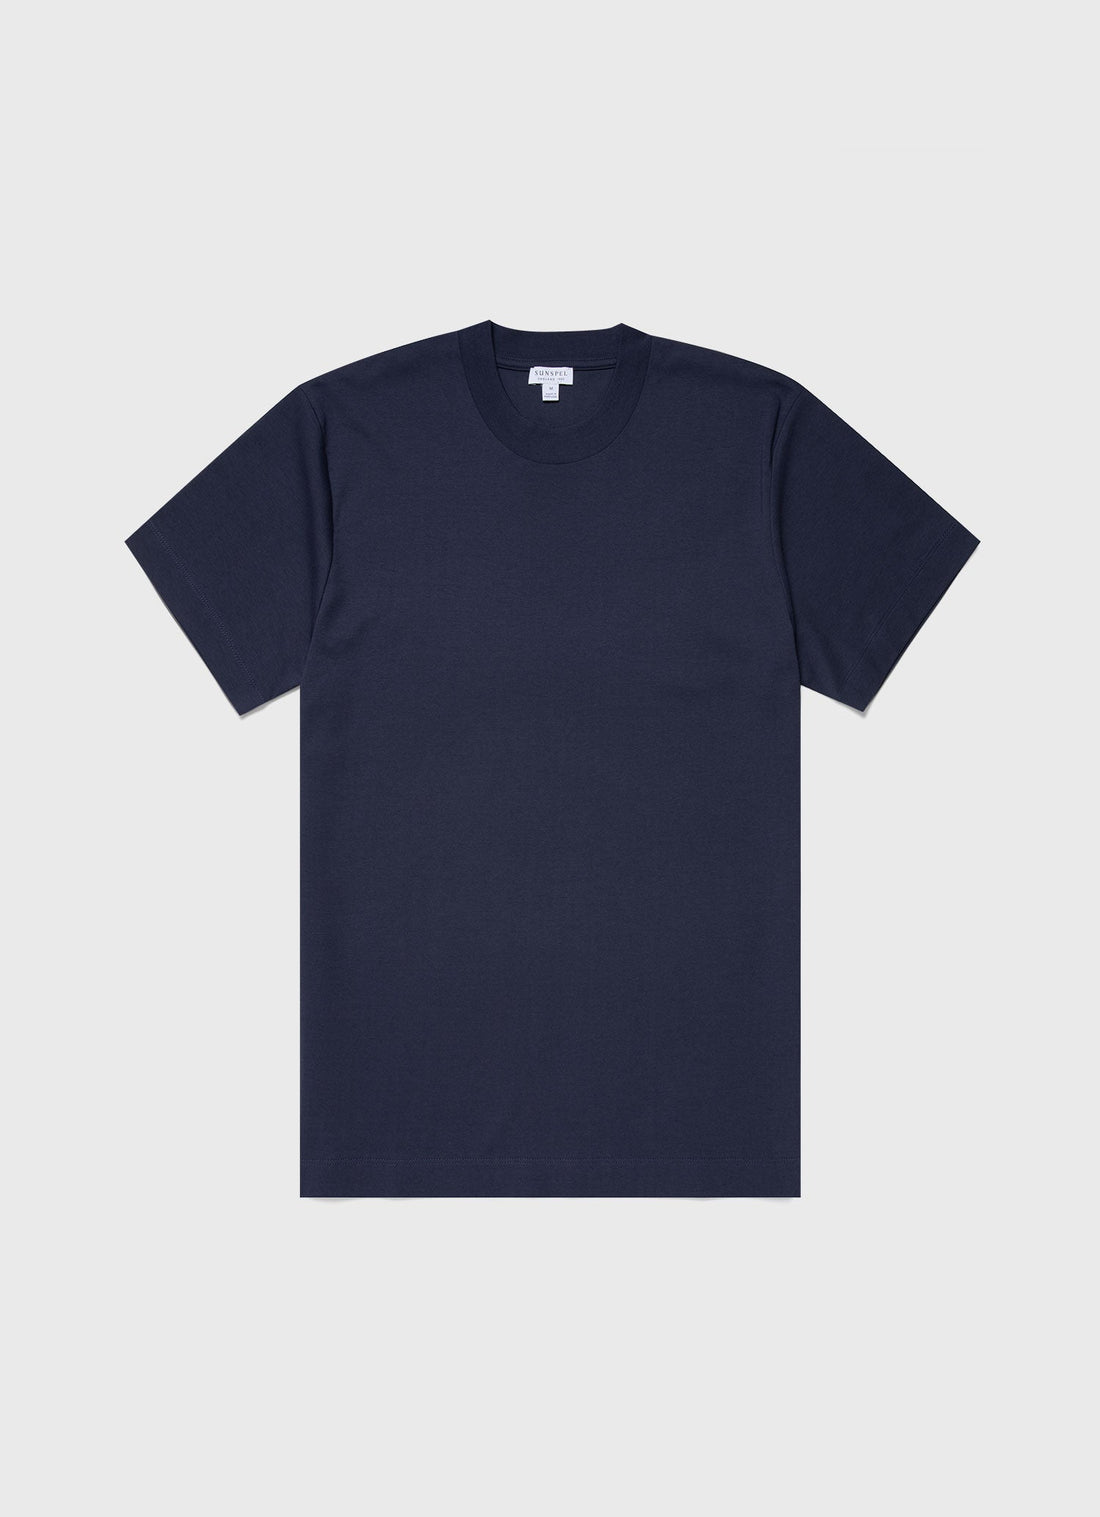 Men's Relaxed Fit Heavyweight T-shirt in Navy